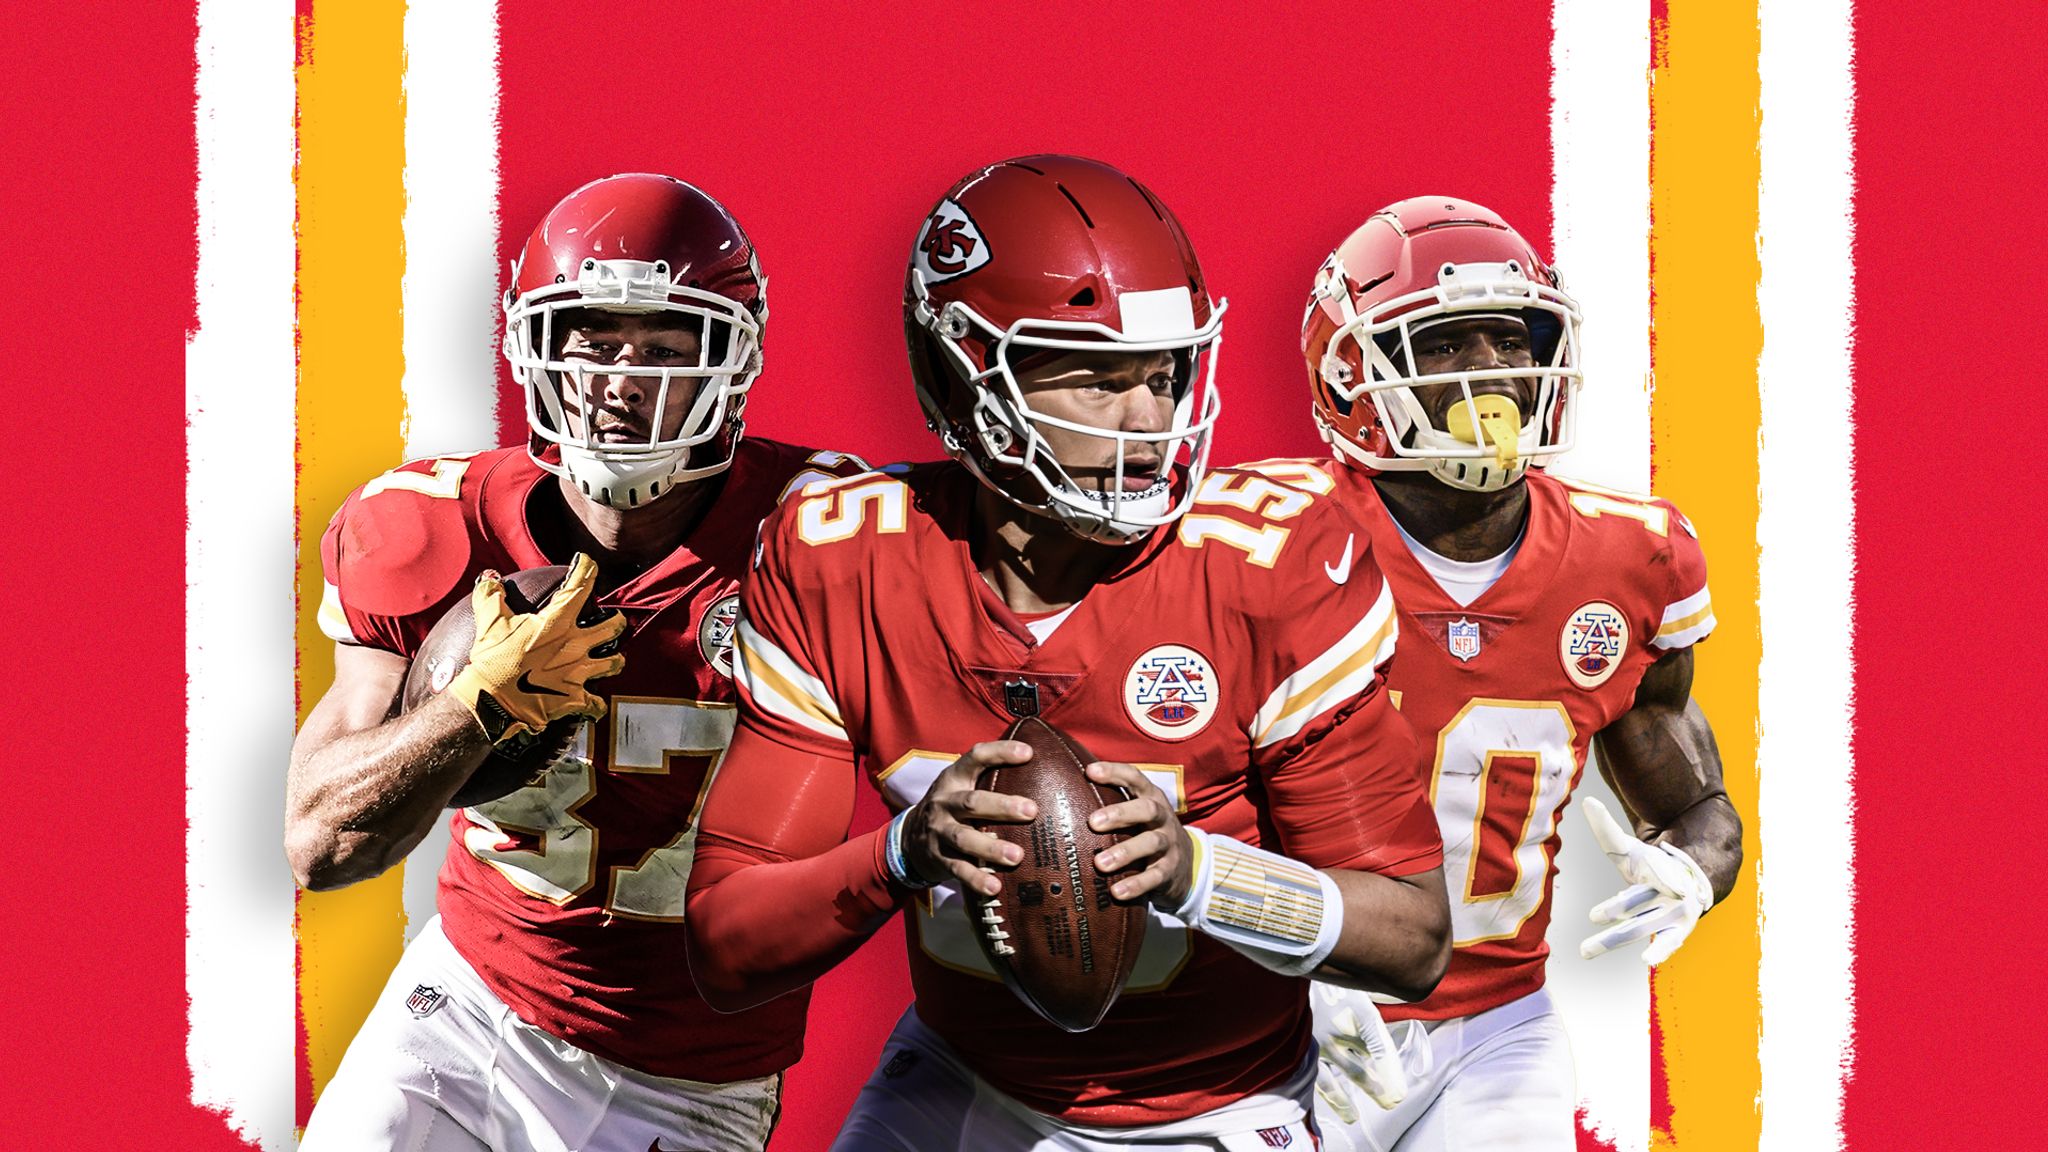 The All Star Kansas City Chiefs Offense Pushing Boundaries In The NFL